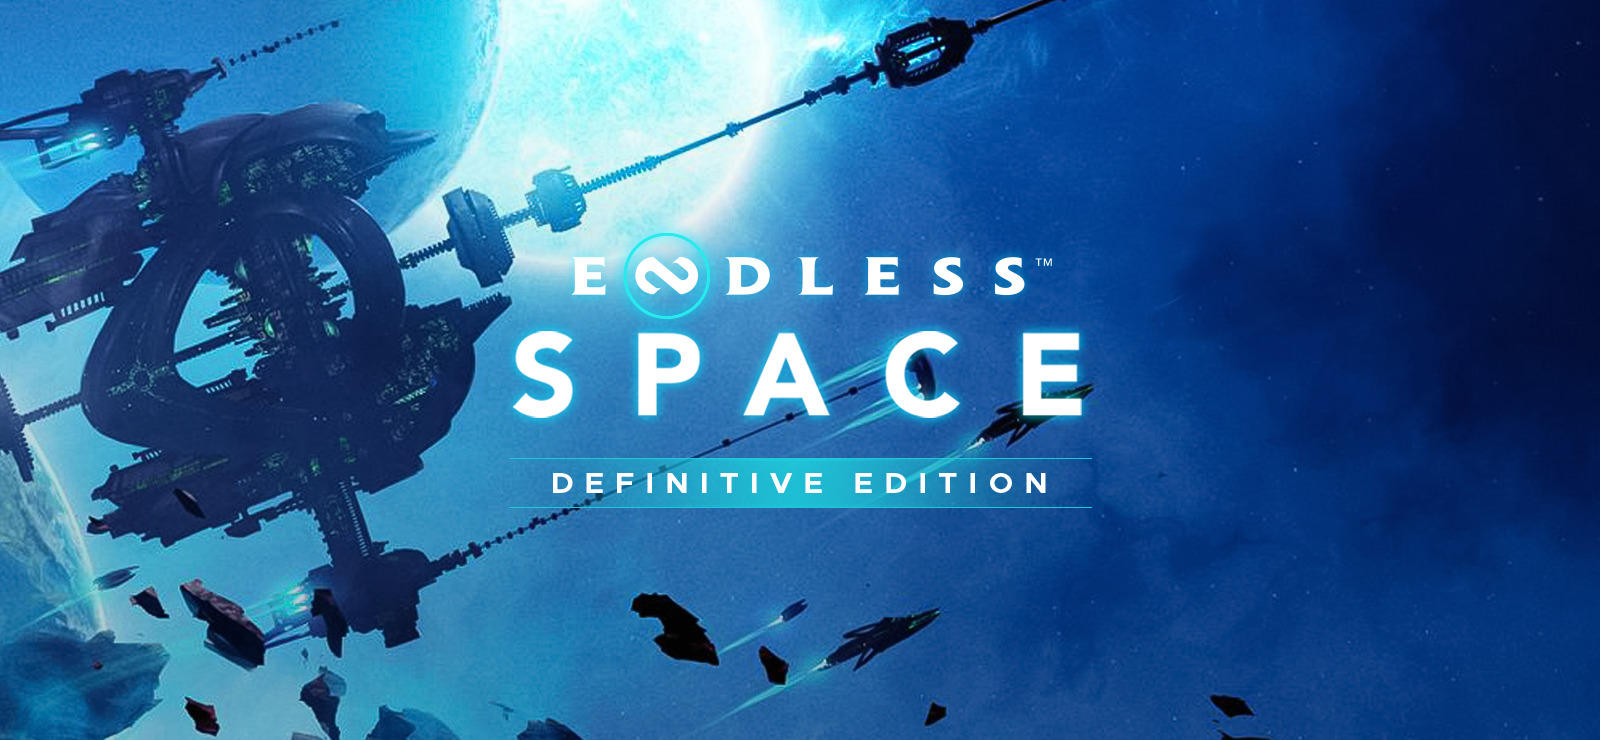 Is endless space on steam фото 5